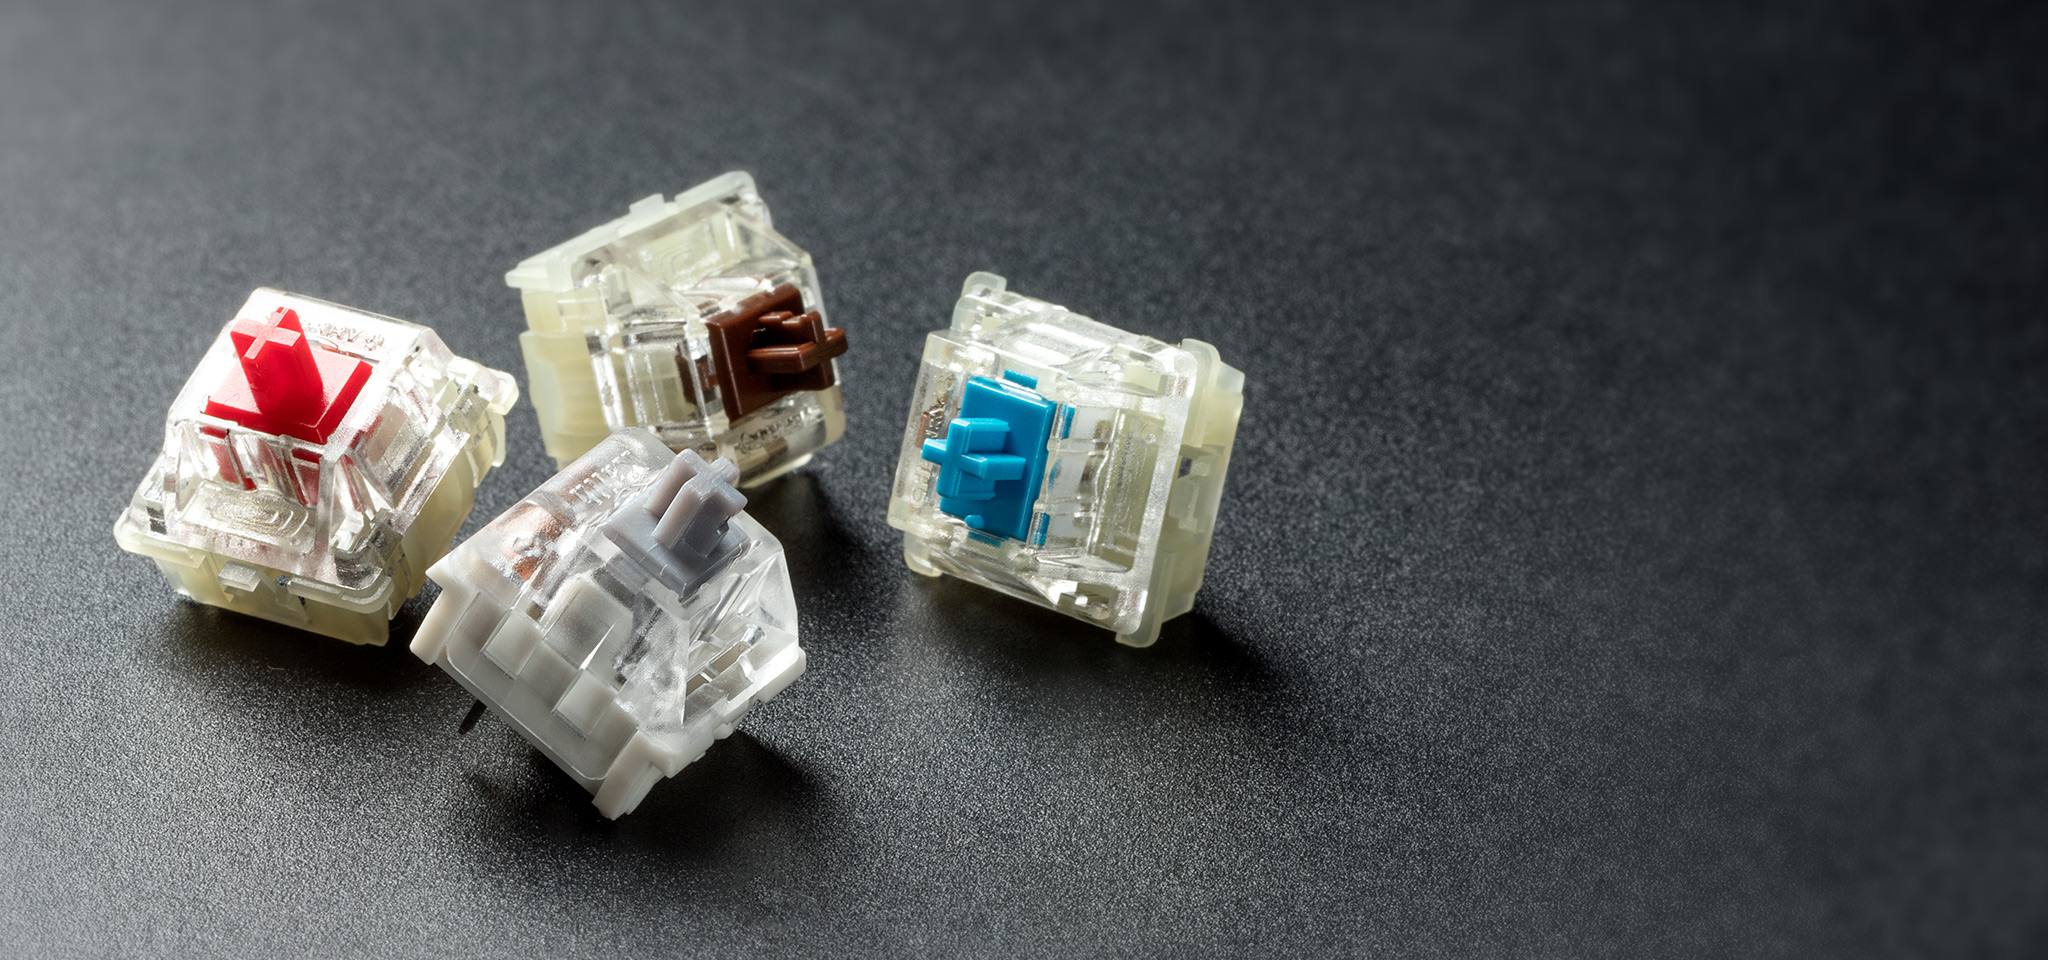 HyperX red, brown, blue and silver switches spread over a table